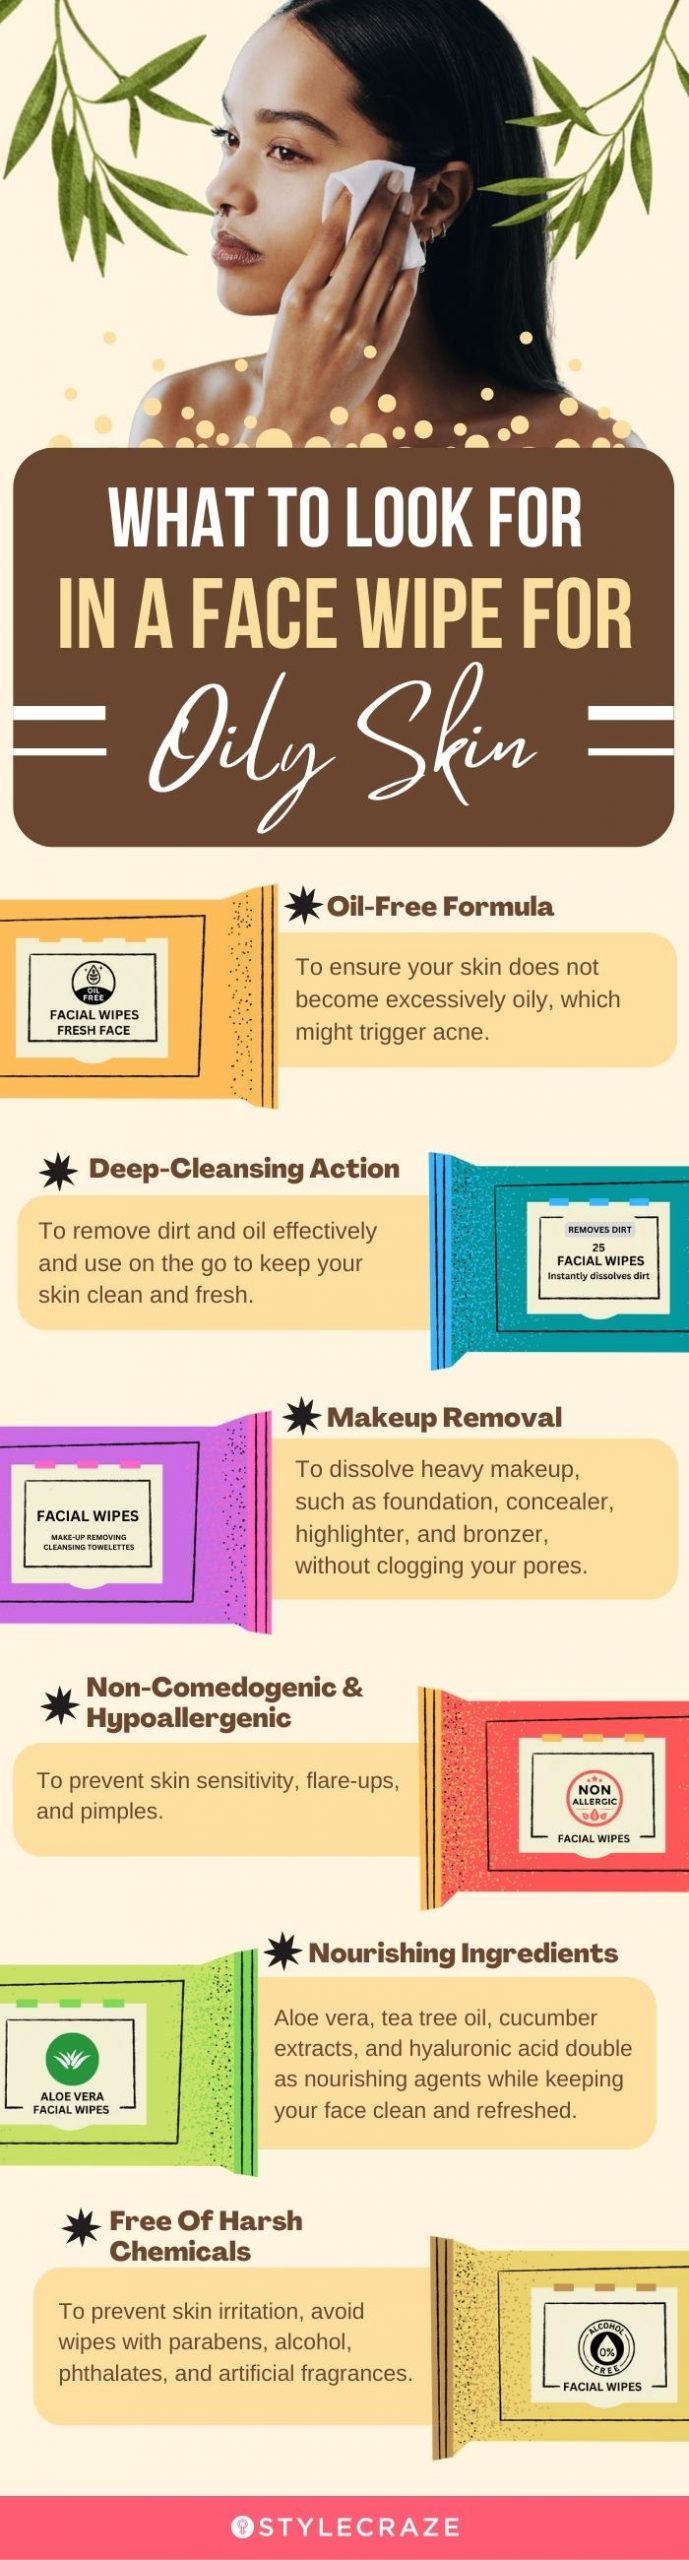 What To Look For In A Face Wipe For Oily Skin (infographic)